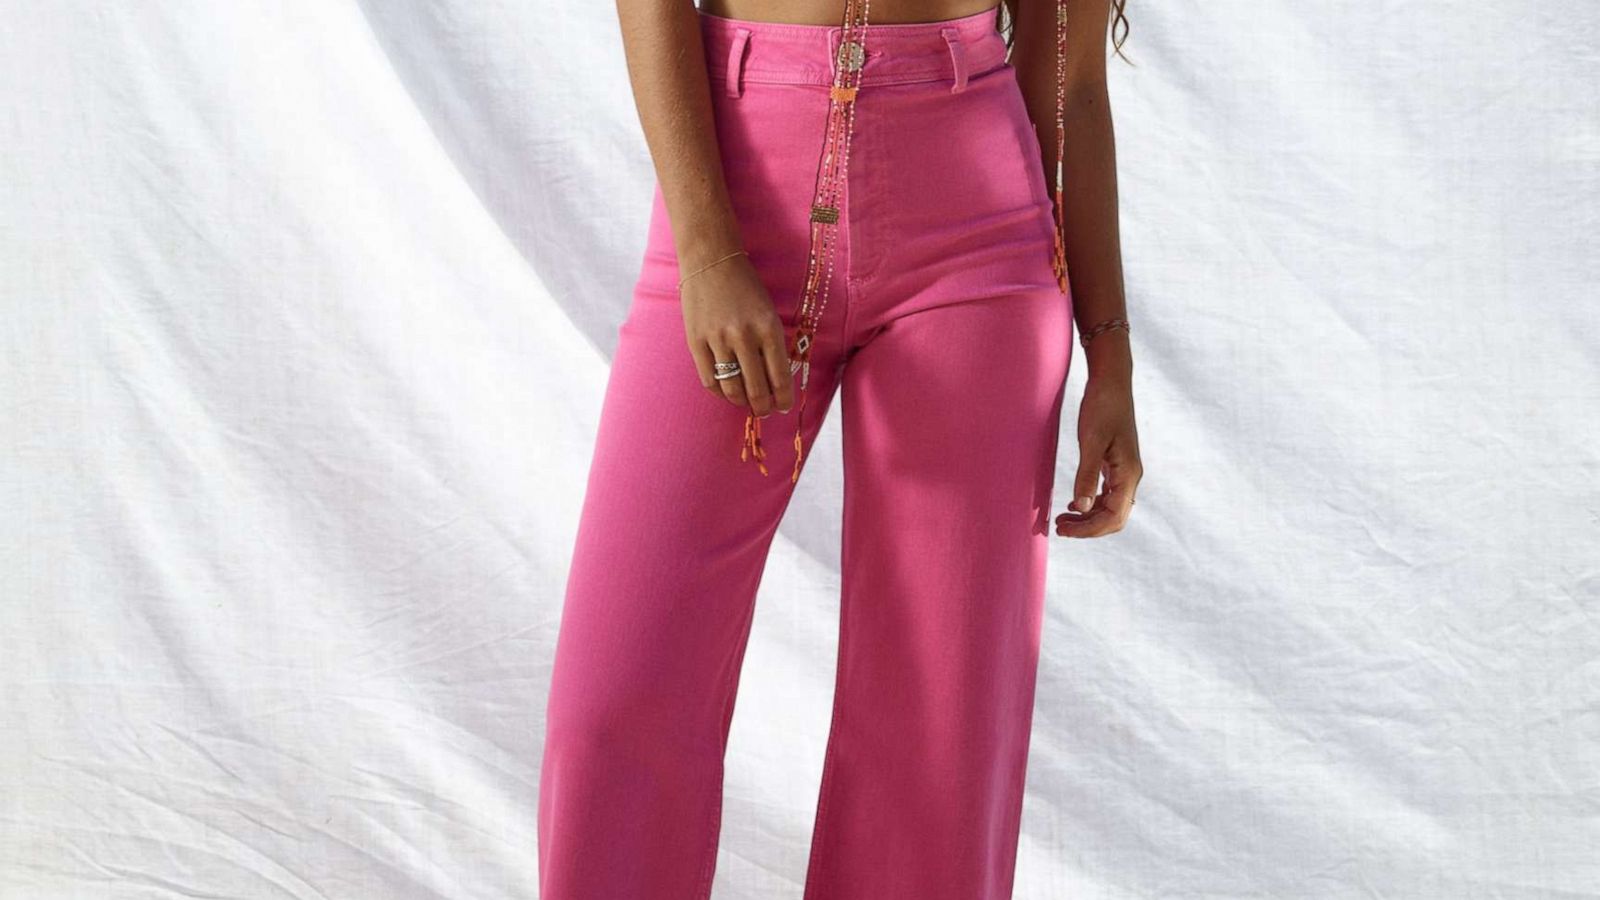 Trending – How About Pink Jeans? - Denimology